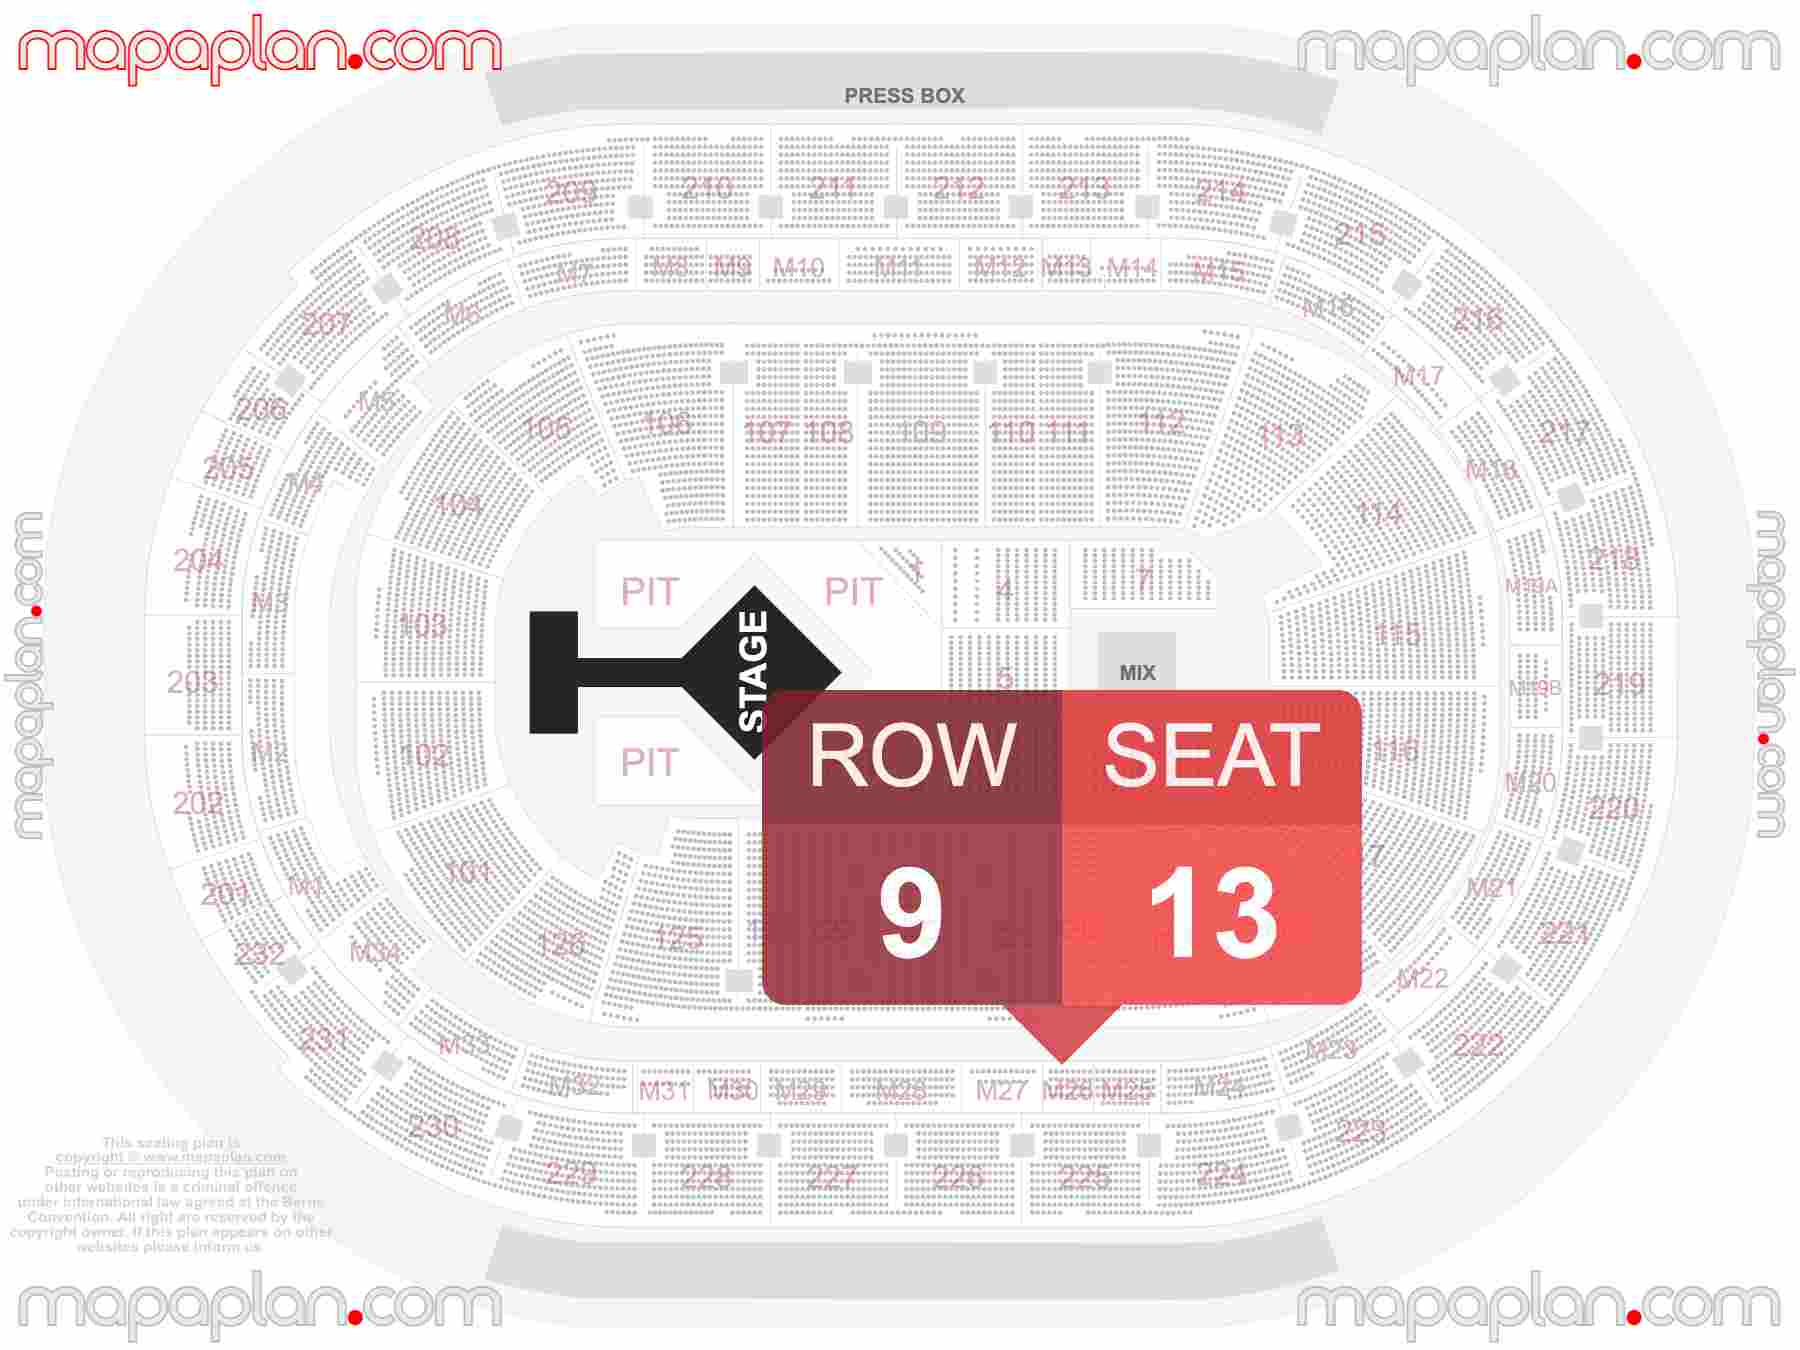 Detroit Little Caesars Arena seating chart Catwalk extended runway concert B-stage detailed seating chart - 3d virtual seat numbers and row layout